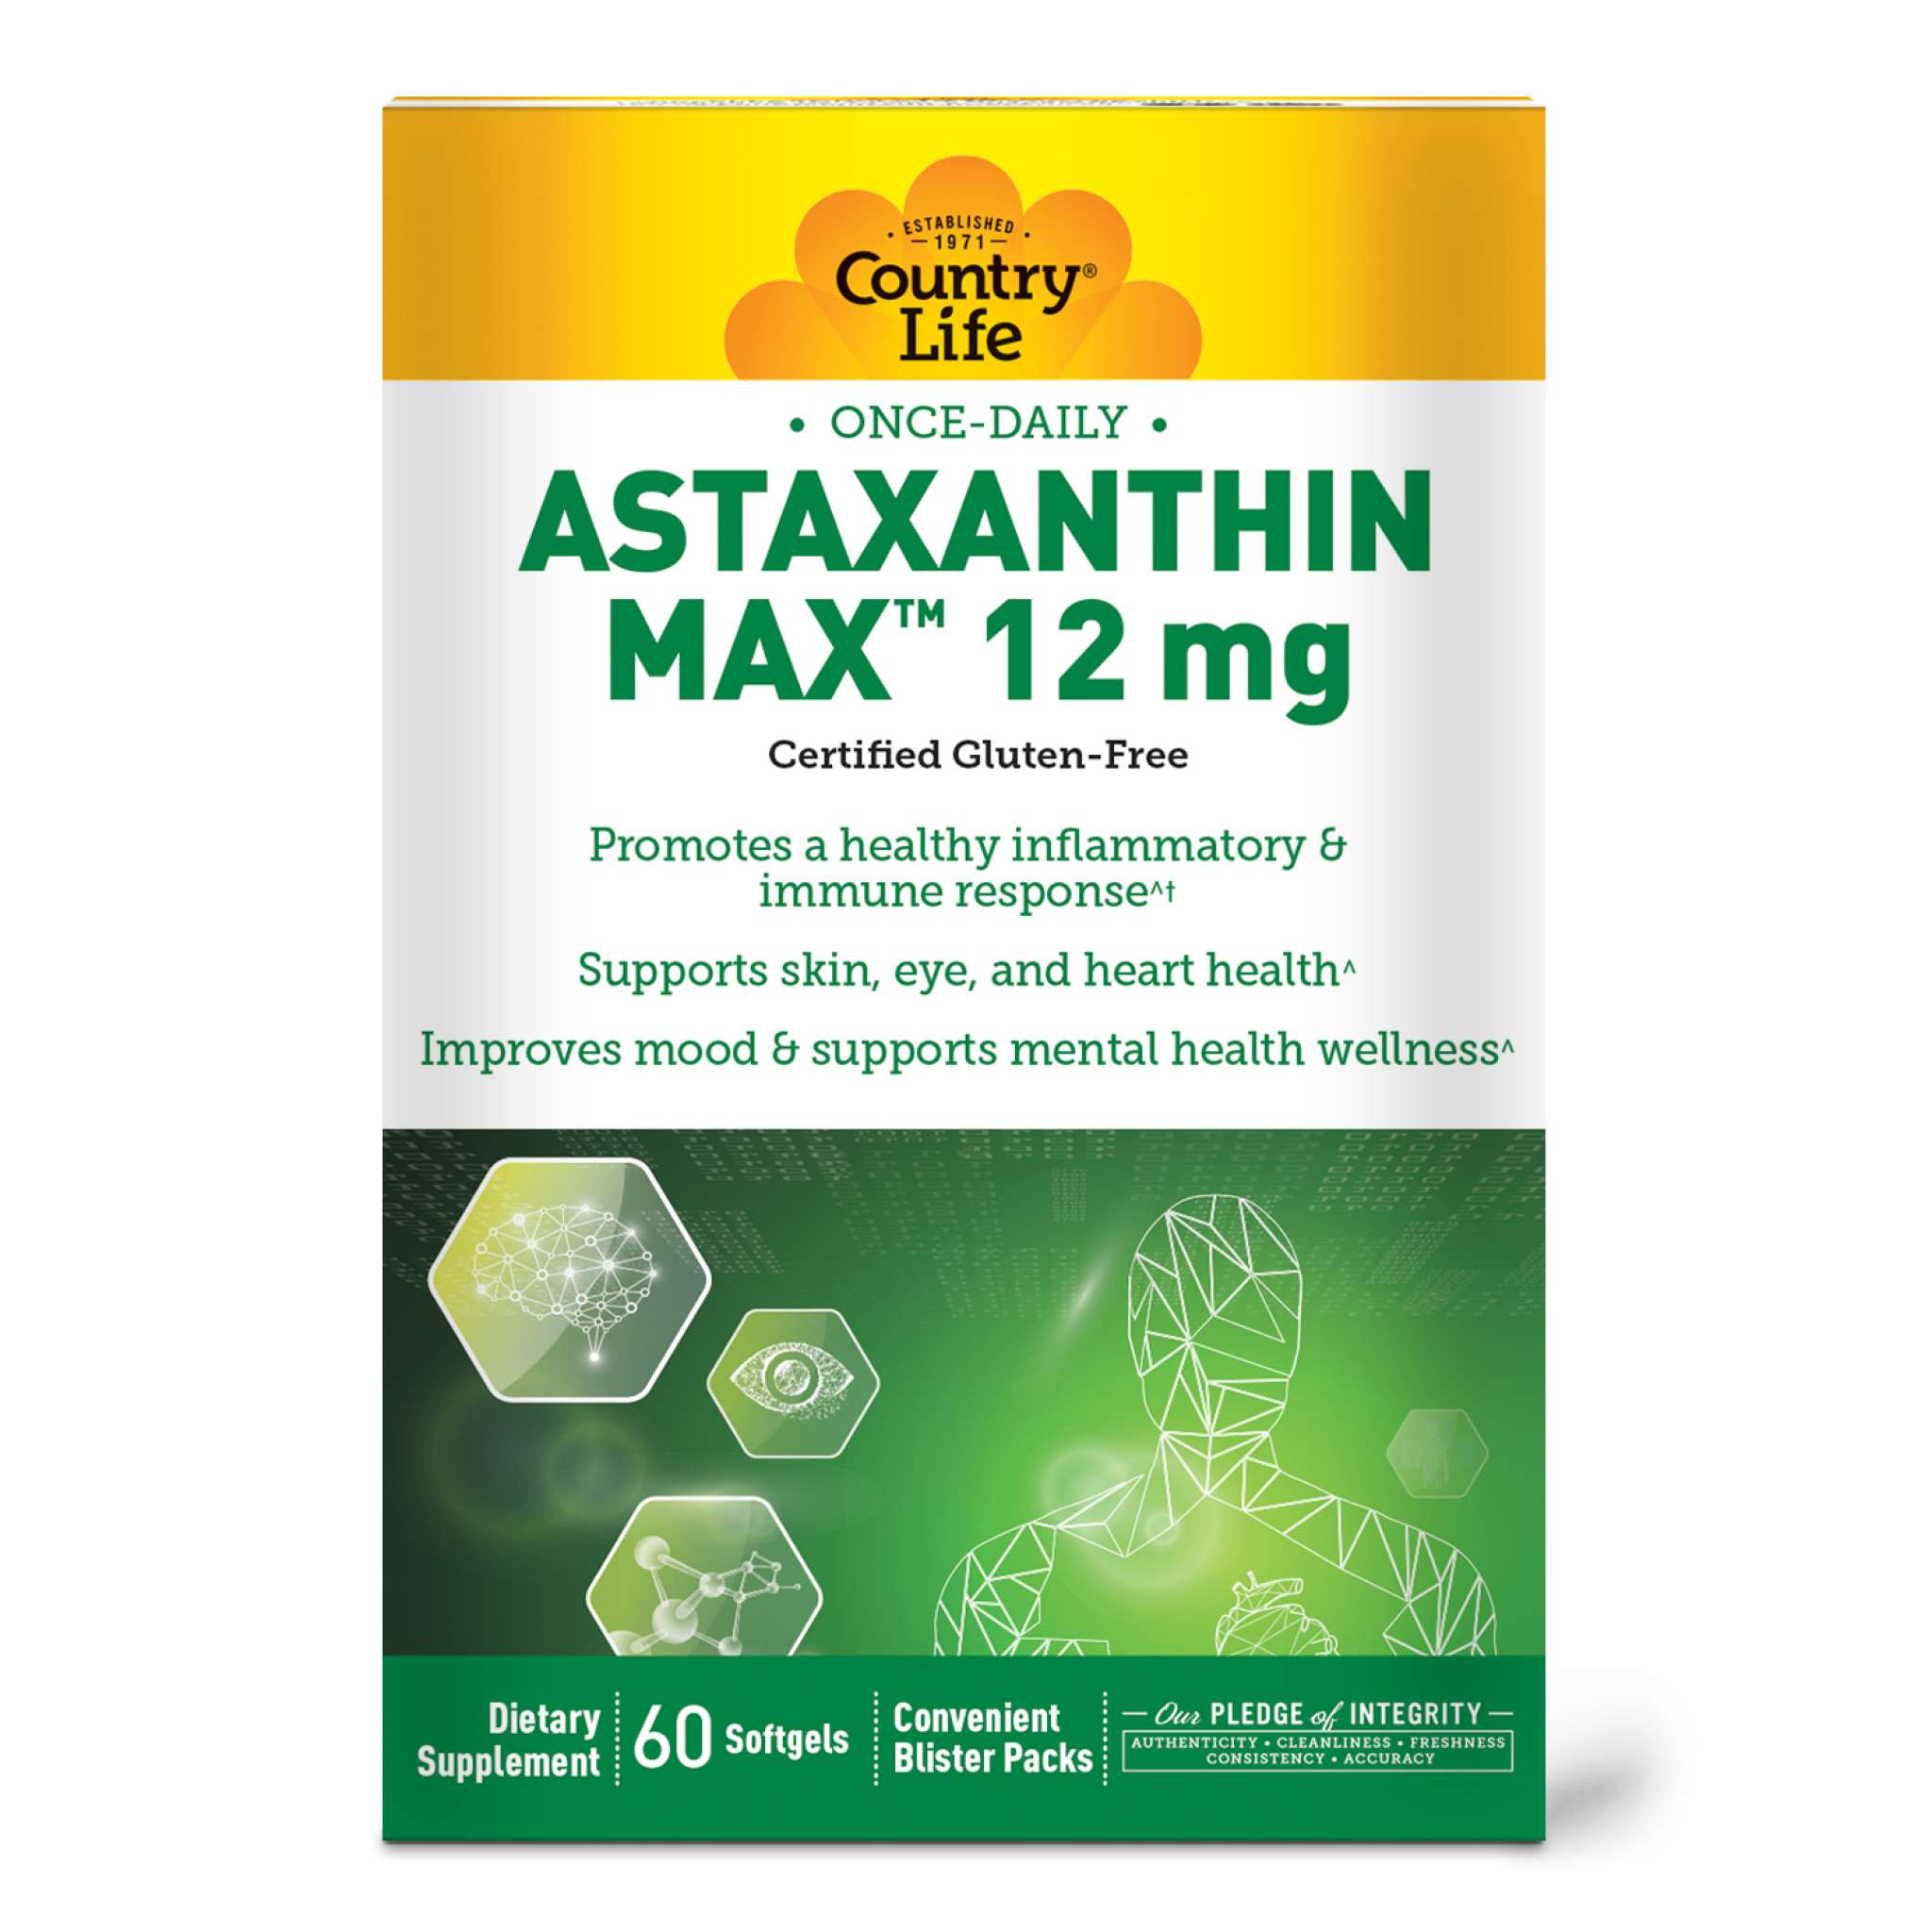 Country Life - Astaxanthin Max 12 mg softgel